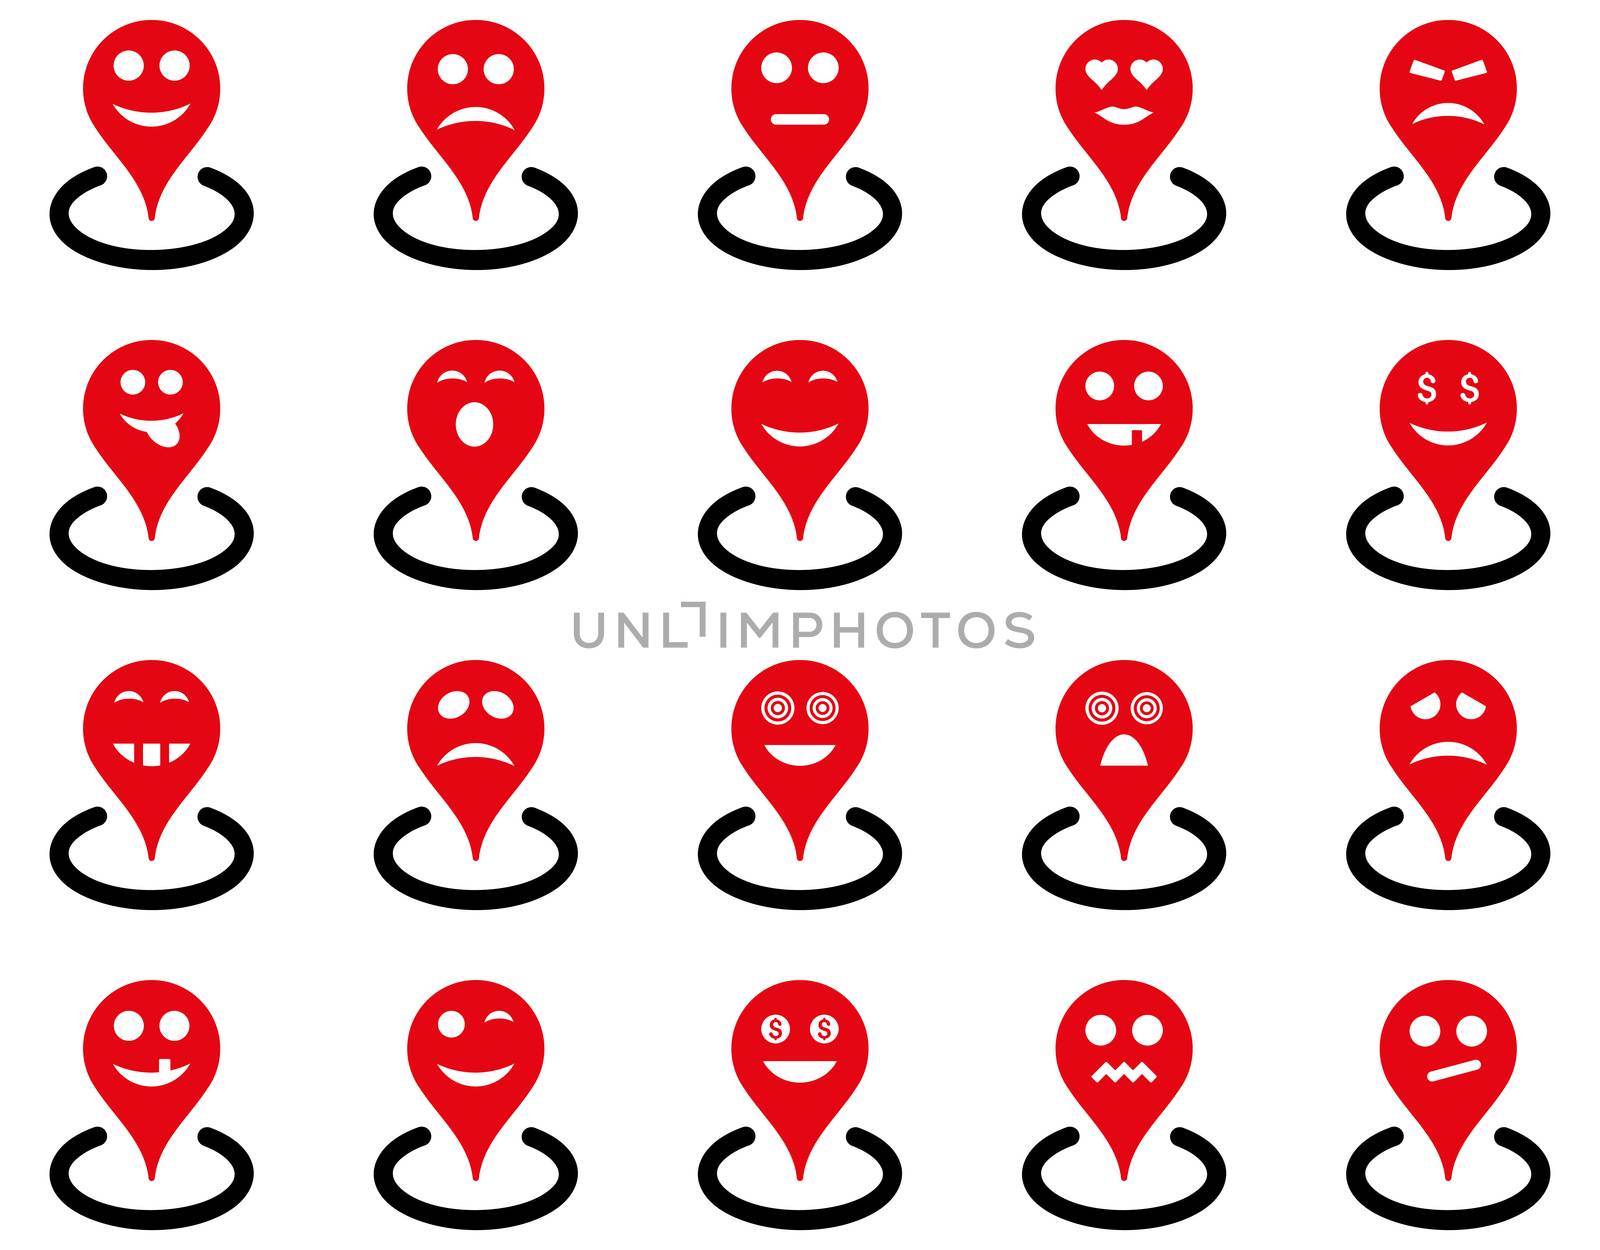 Smiled location icons. Glyph set style is bicolor flat images, intensive red and black symbols, isolated on a white background.